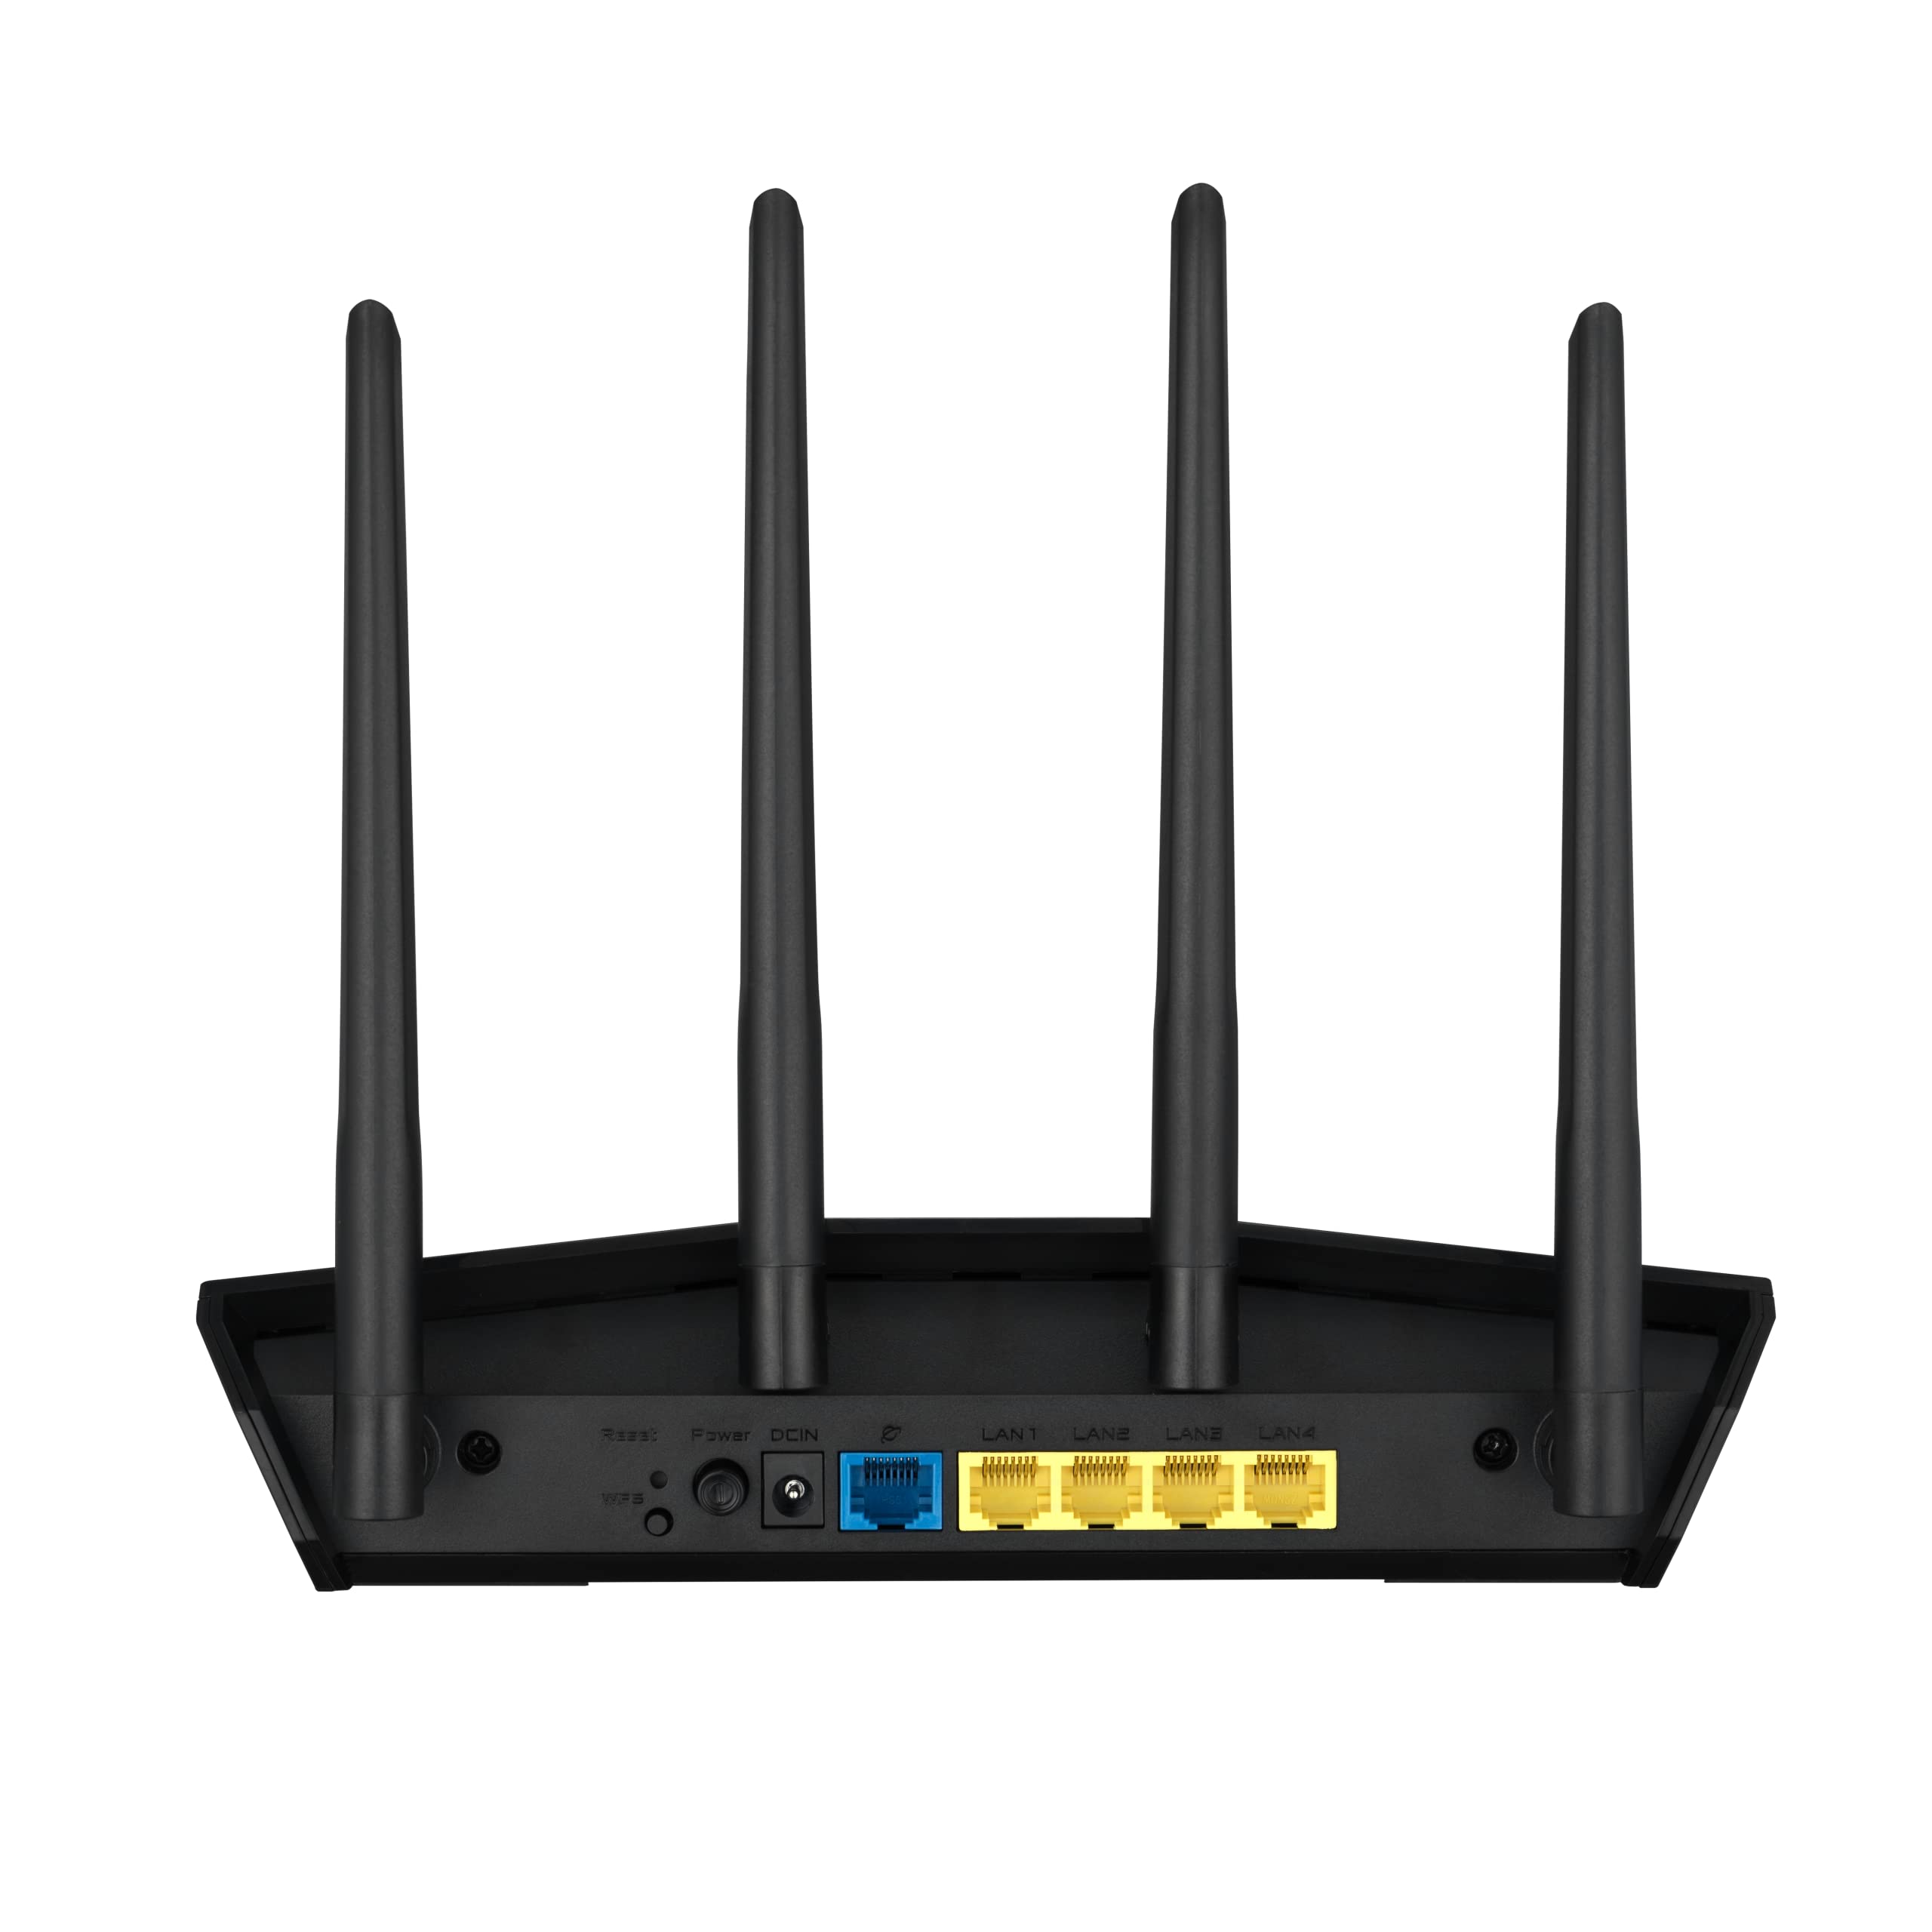 ASUS WiFi 6 Router (RT-AX57) - Dual Band AX3000 WiFi Router, Gaming & Streaming, AiMesh Compatible, Included Lifetime Internet Security, Parental Control, MU-MIMO, OFDMA